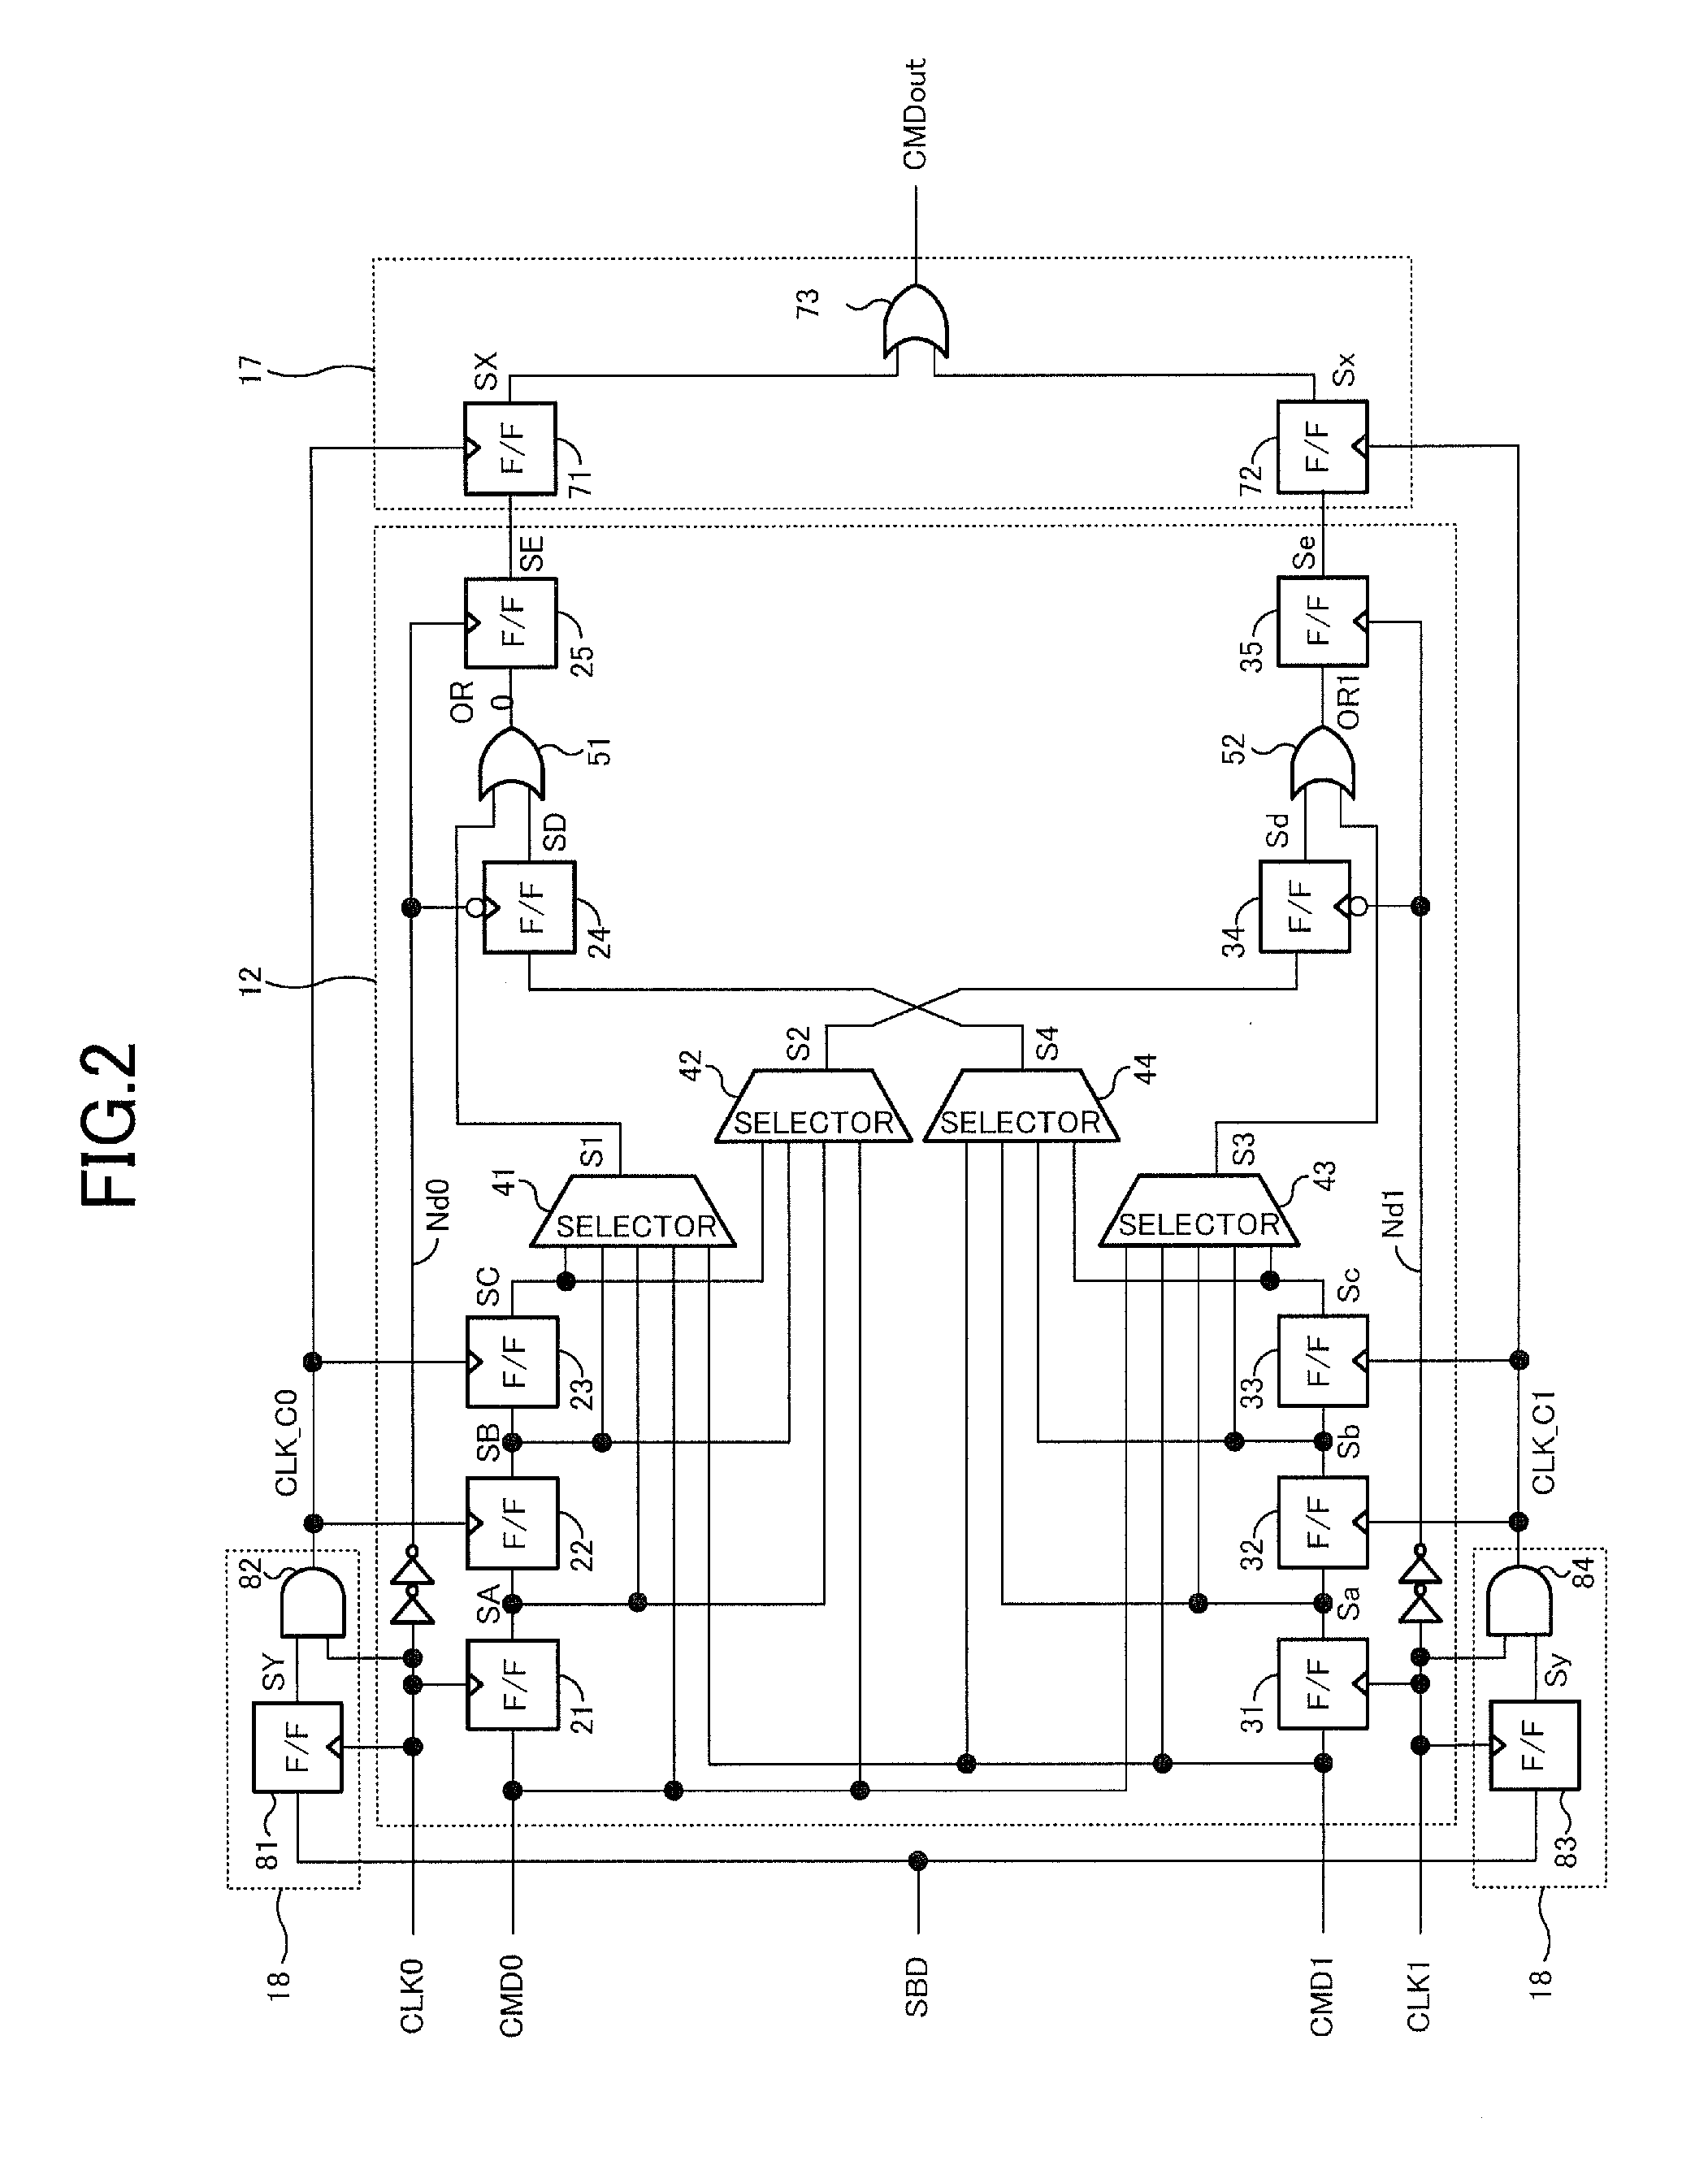 Semiconductor device having latency counter